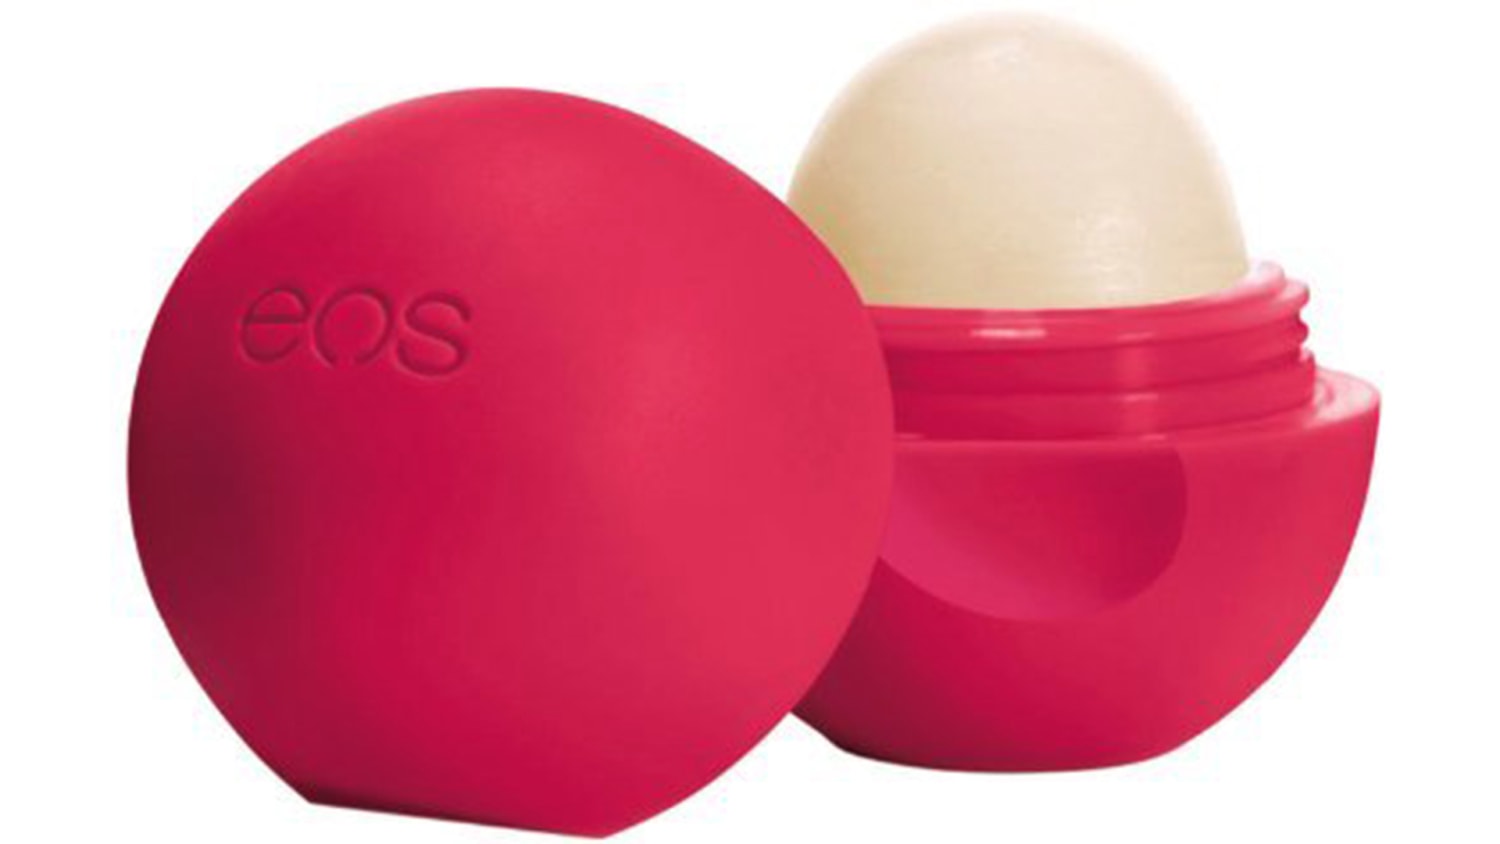 EOS balm lawsuit resolved, packaging will include safety